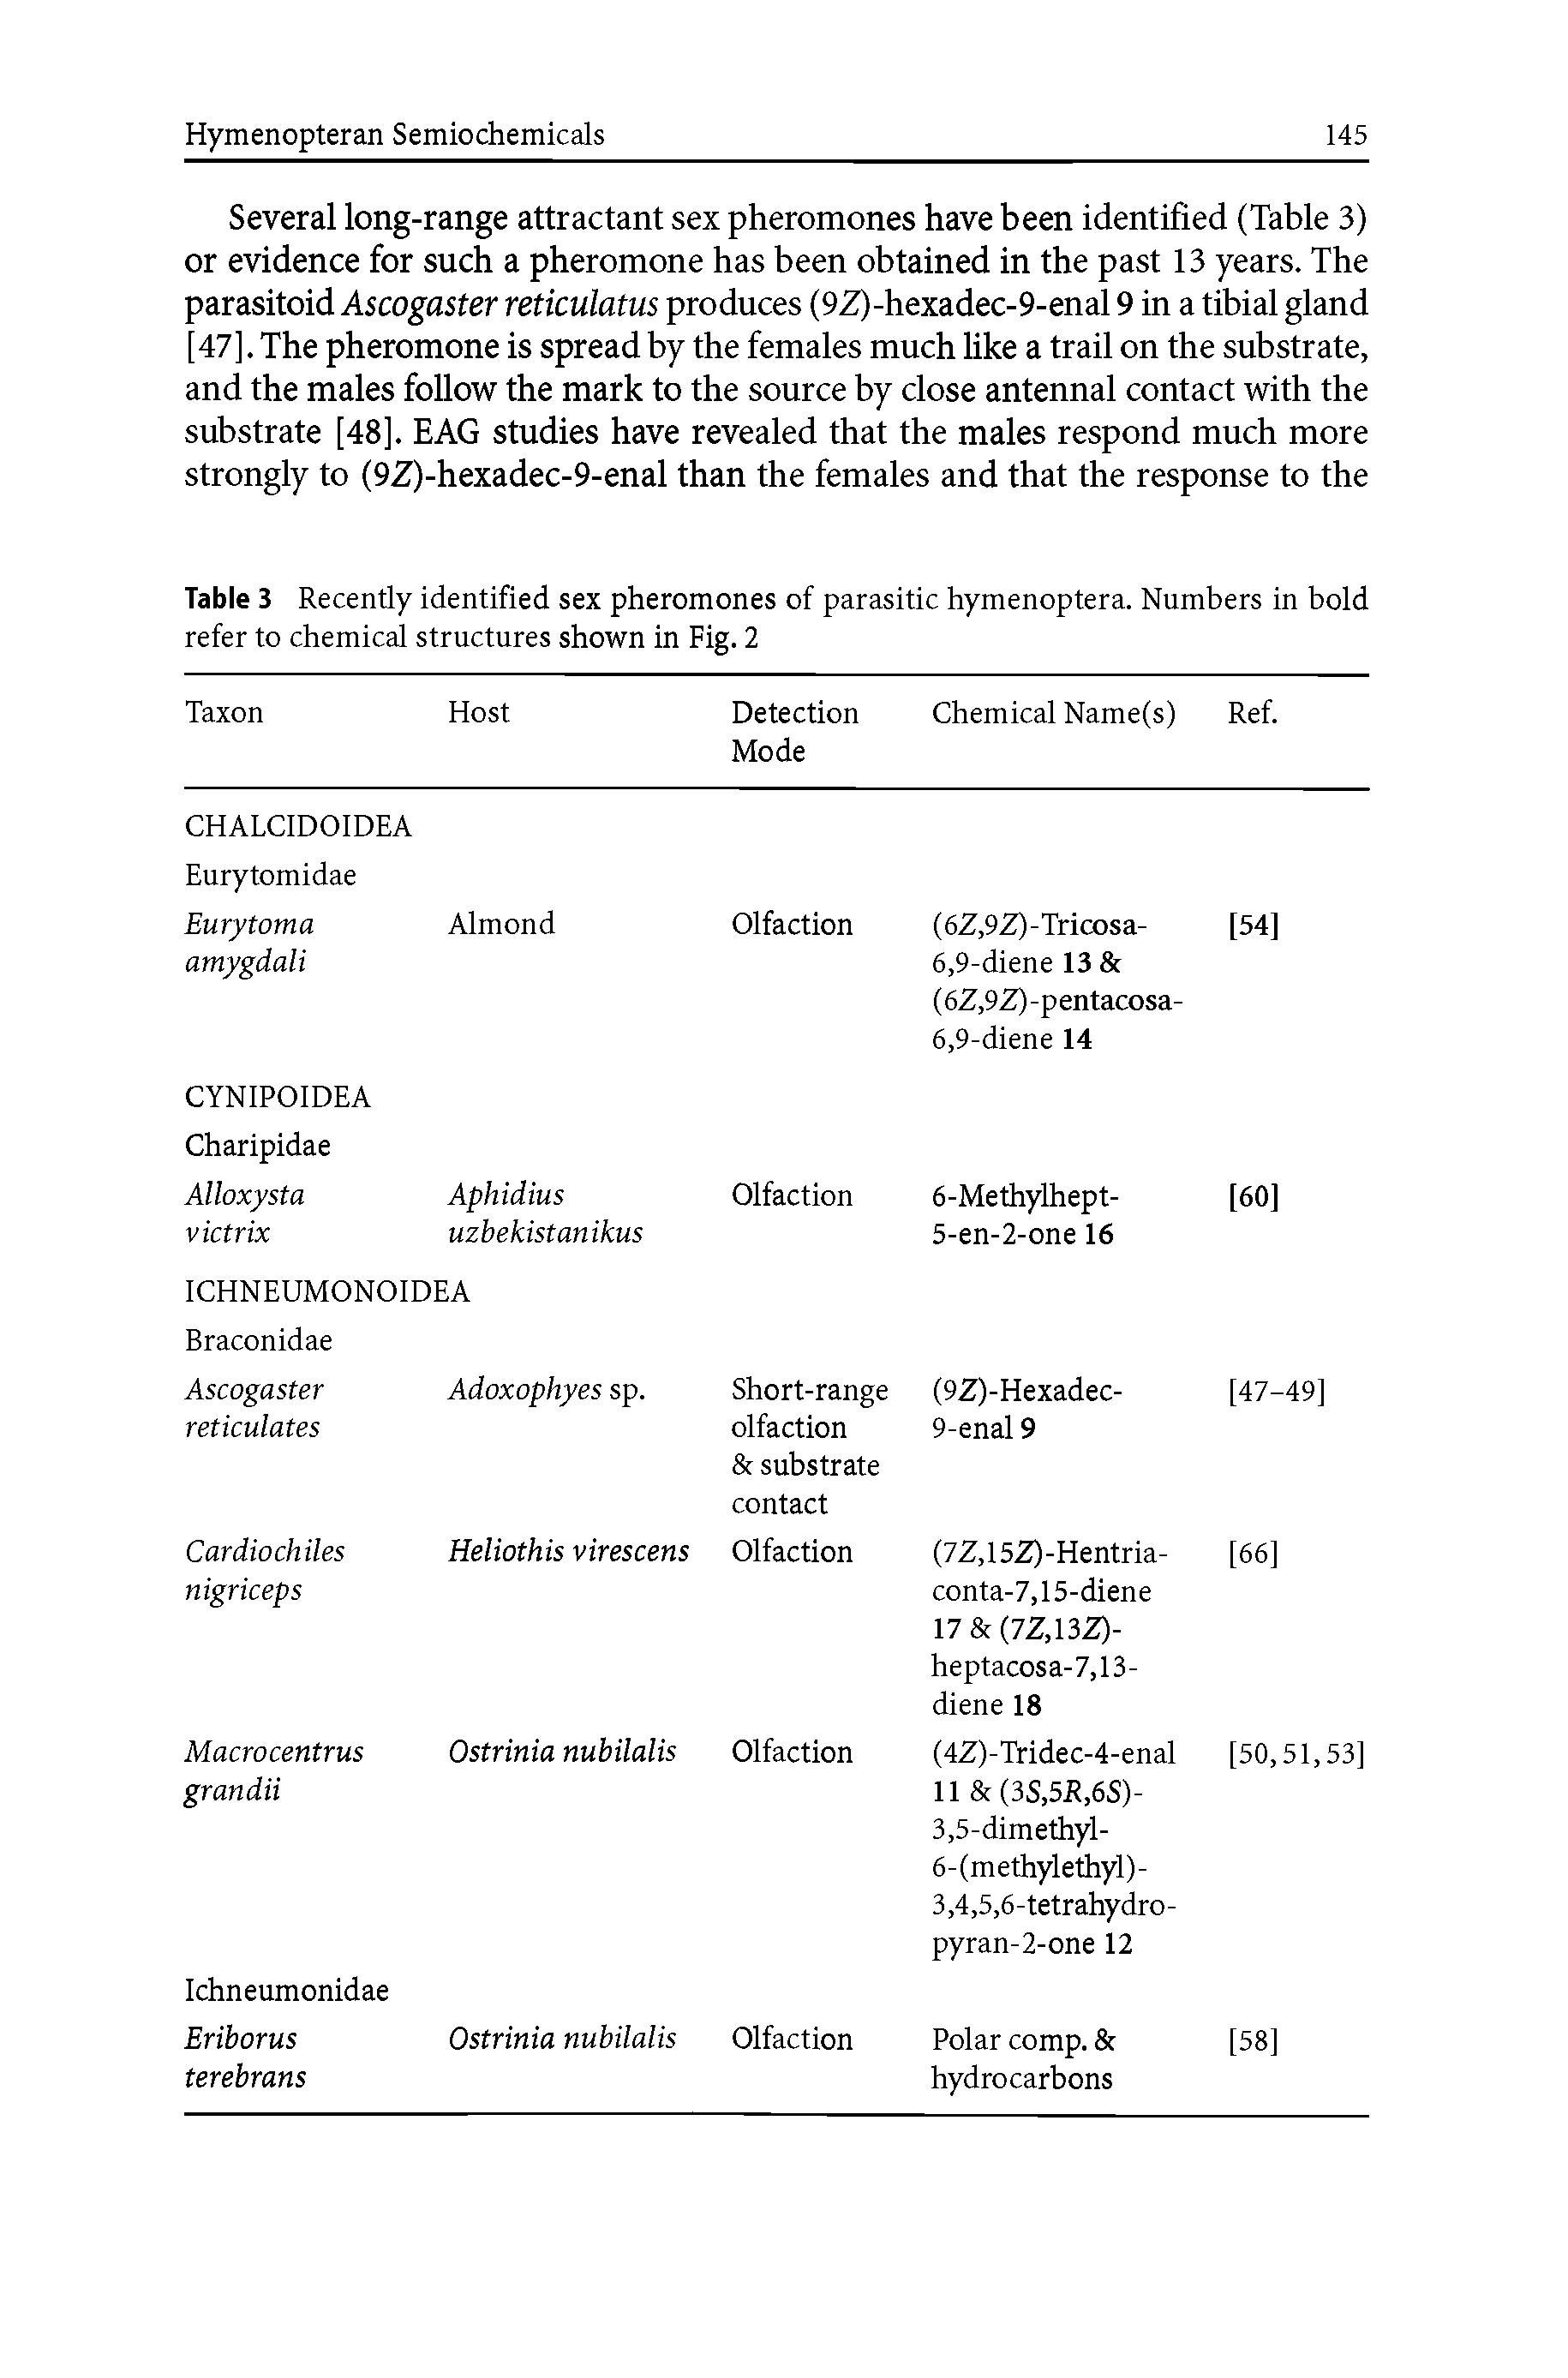 Table 3 Recently identified sex pheromones of parasitic hymenoptera. Numbers in bold refer to chemical structures shown in Fig. 2...